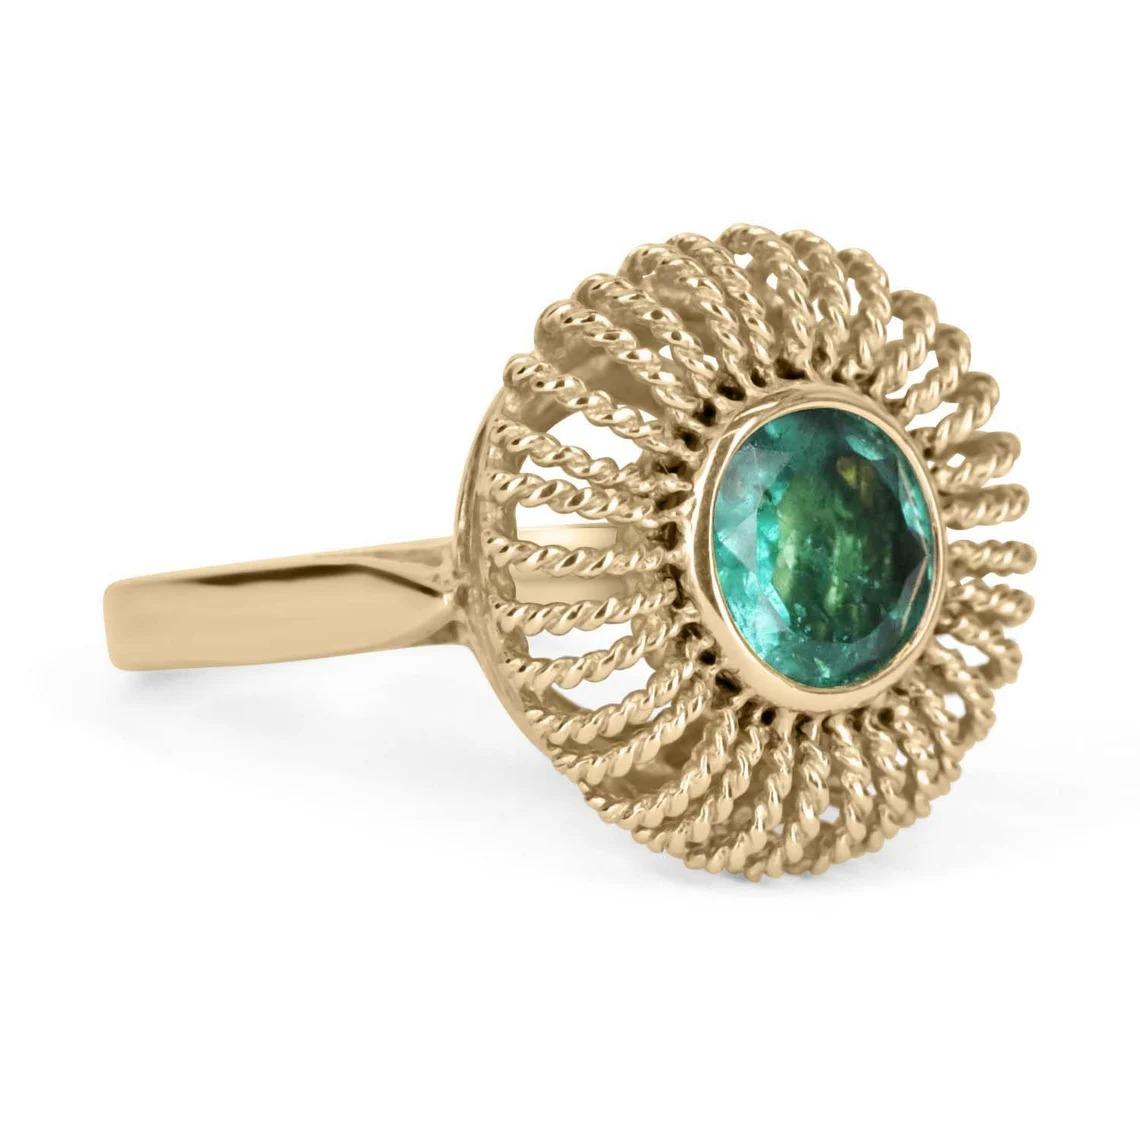 Displayed is a Retro handmade round and gold solitaire ring crafted around the 1950s. The natural center stone has a beautiful sea bluish-green color and impressive size. Steadily put, the earth mind emerald is held in a secure 14K yellow gold bezel